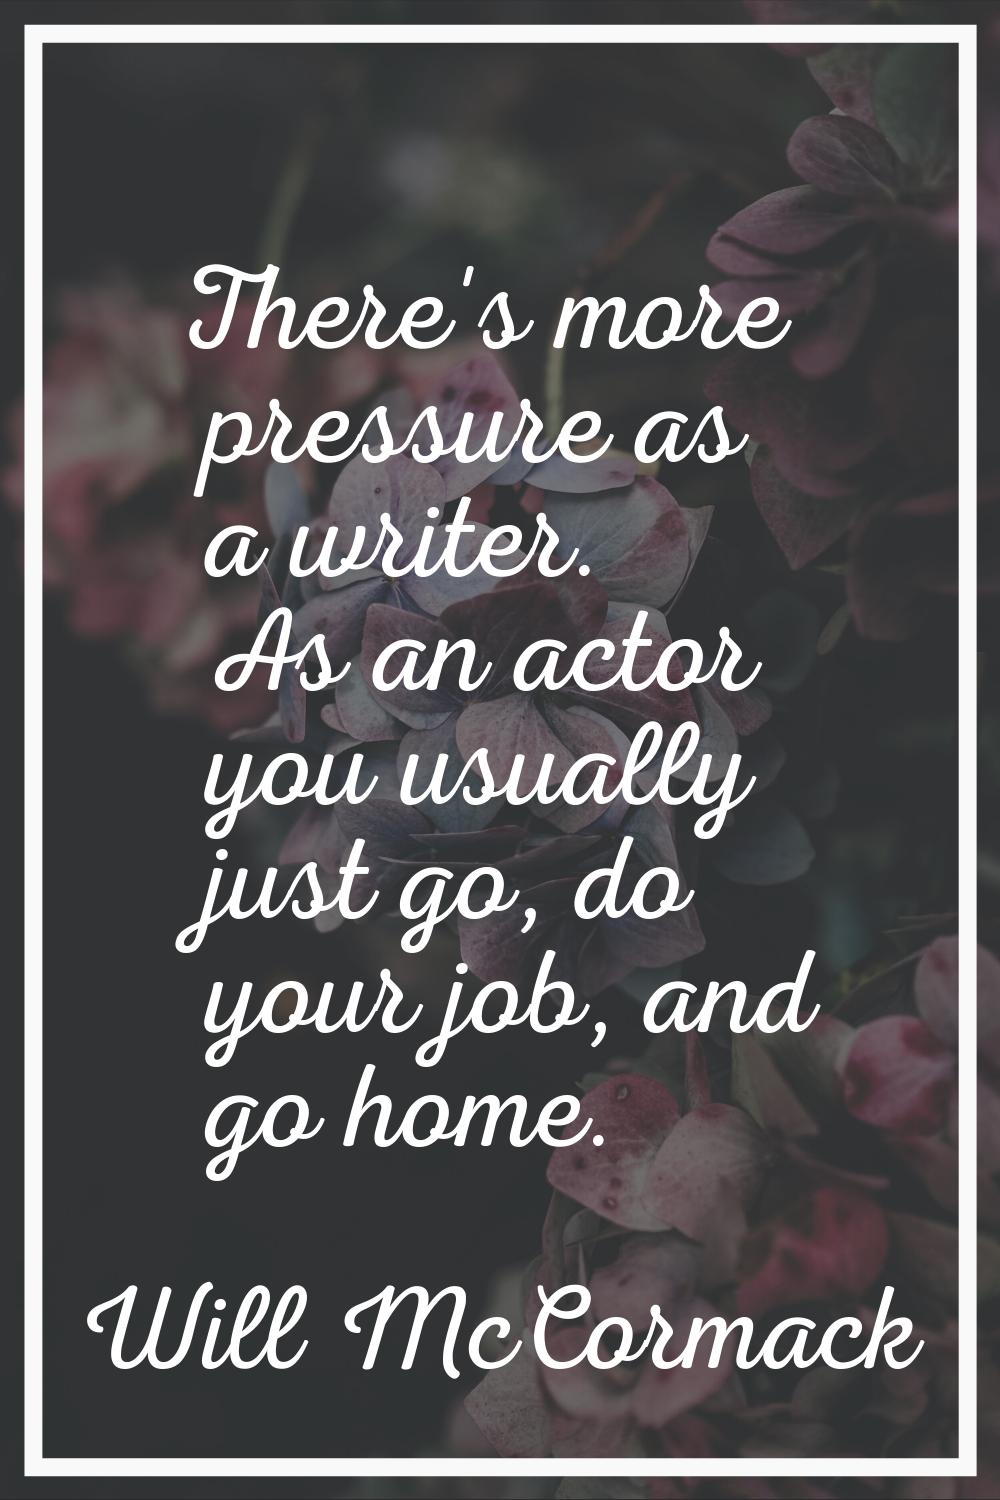 There's more pressure as a writer. As an actor you usually just go, do your job, and go home.